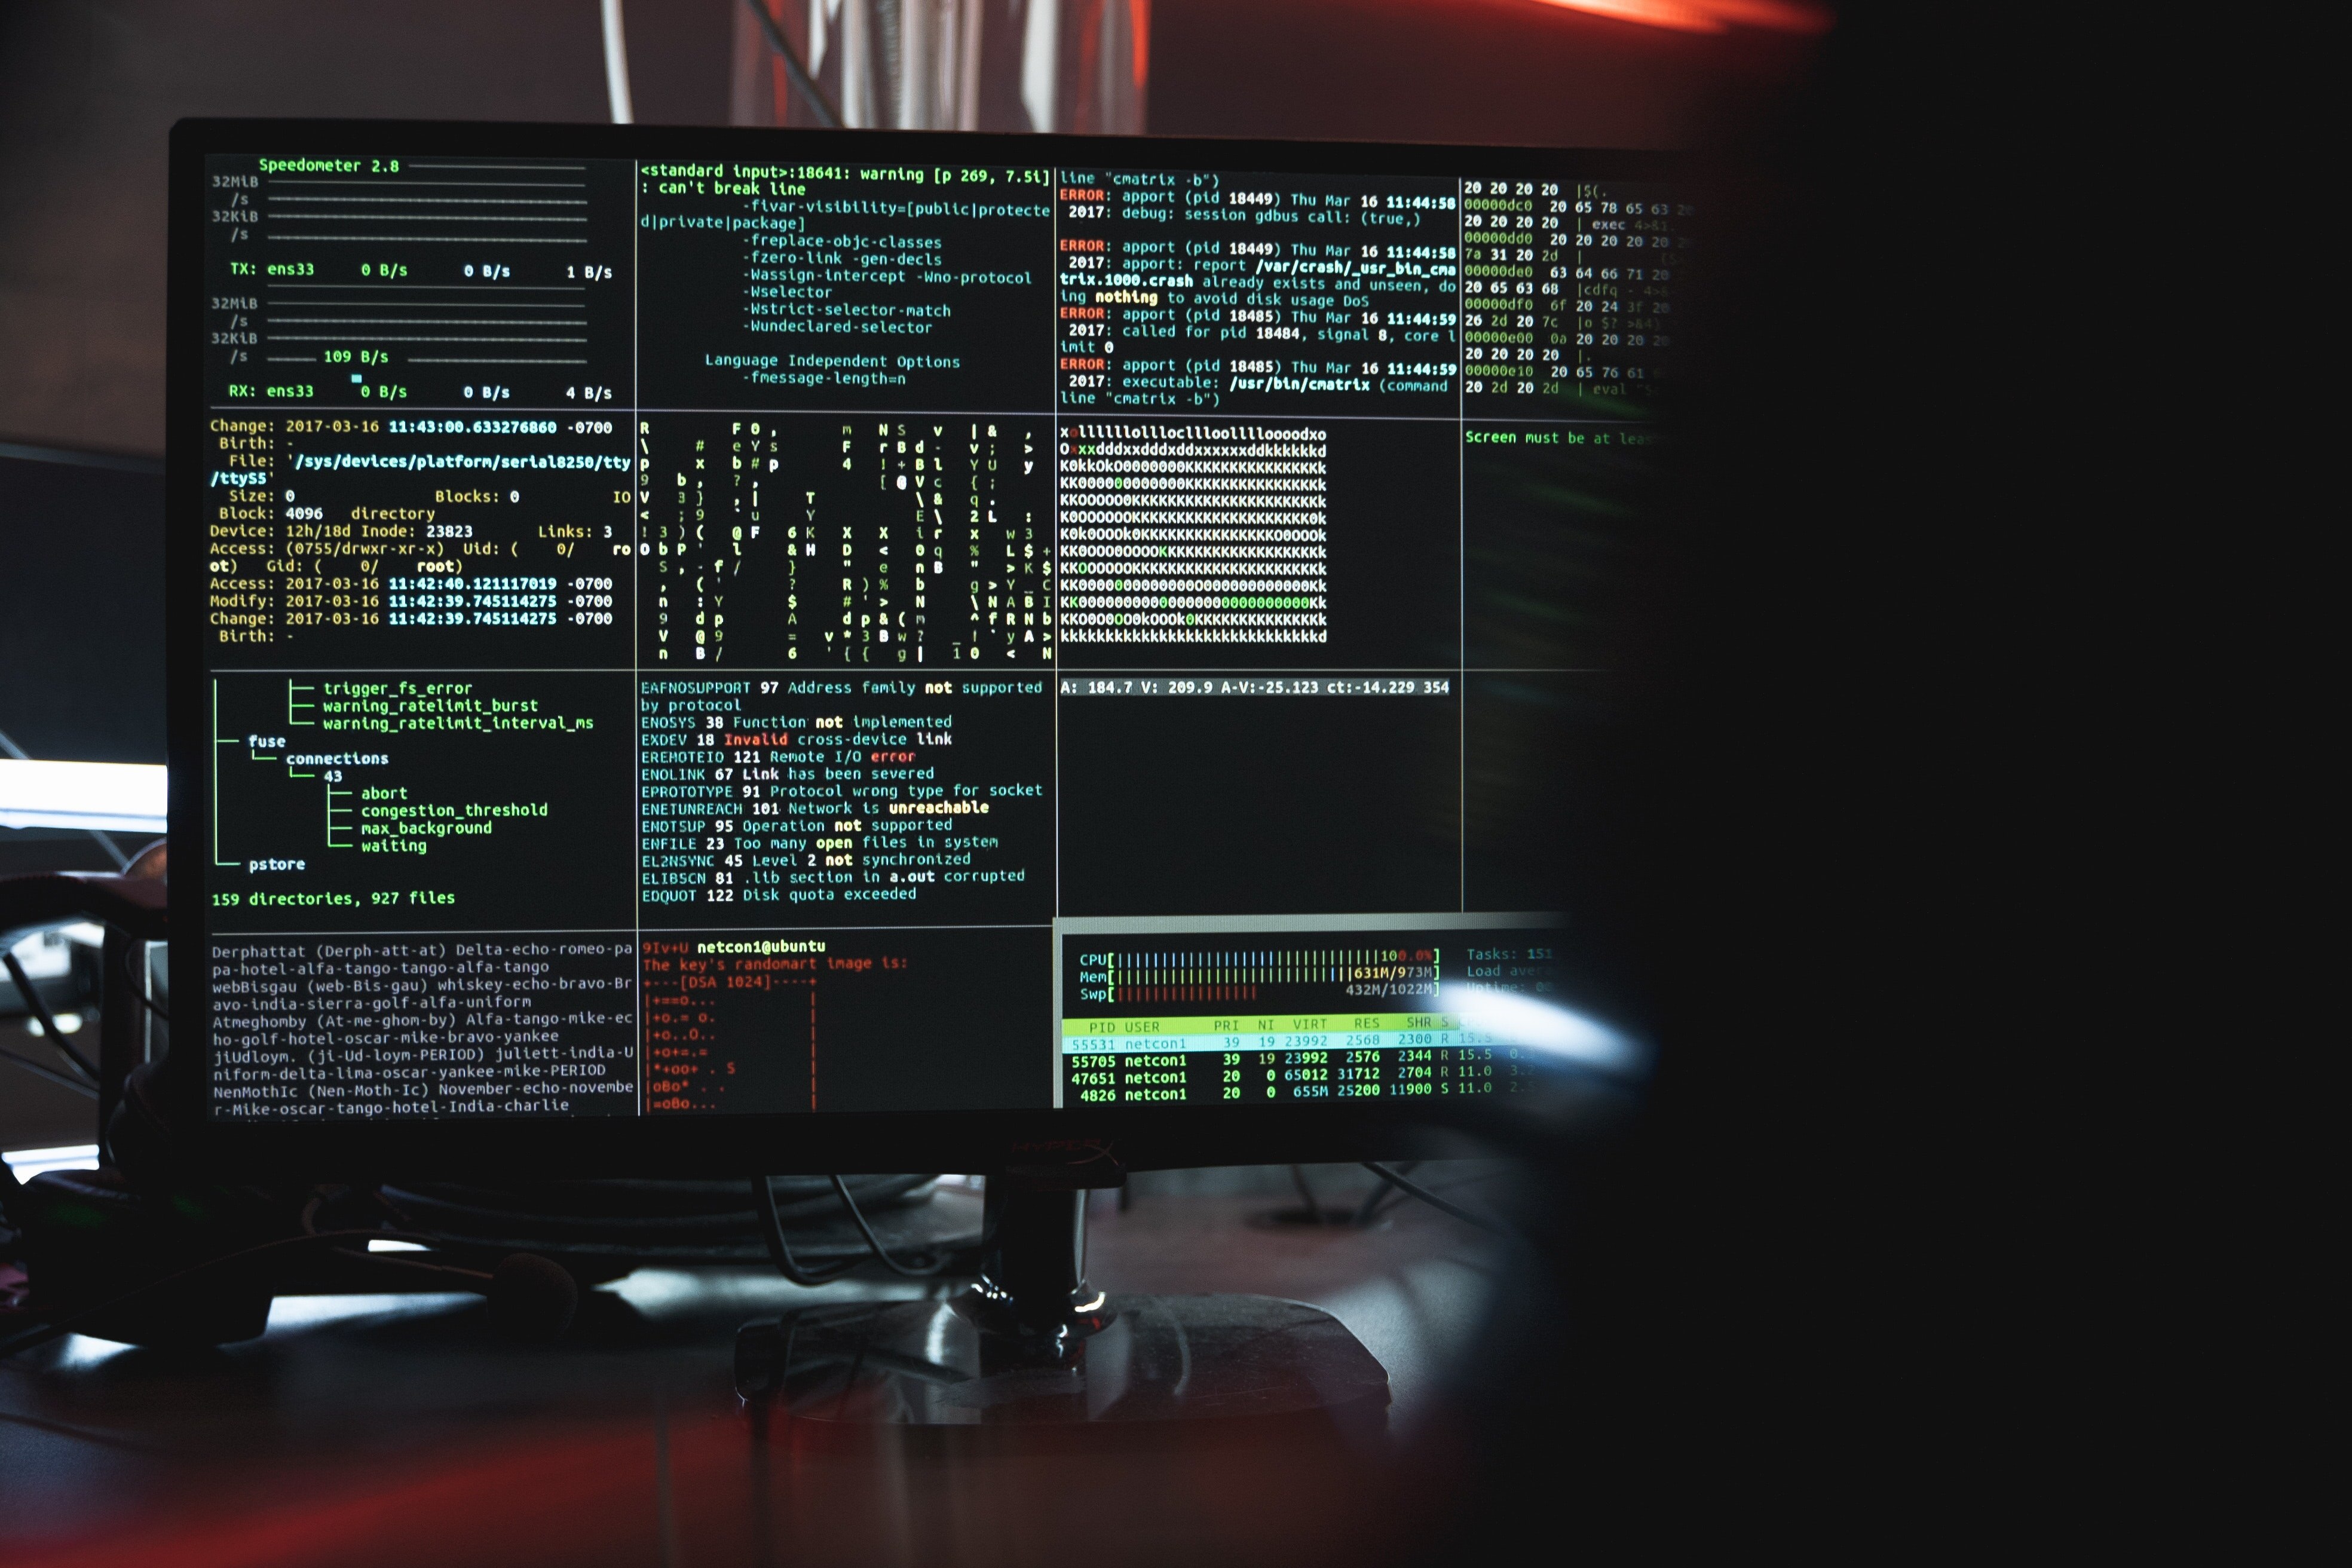 View of a system being hacked